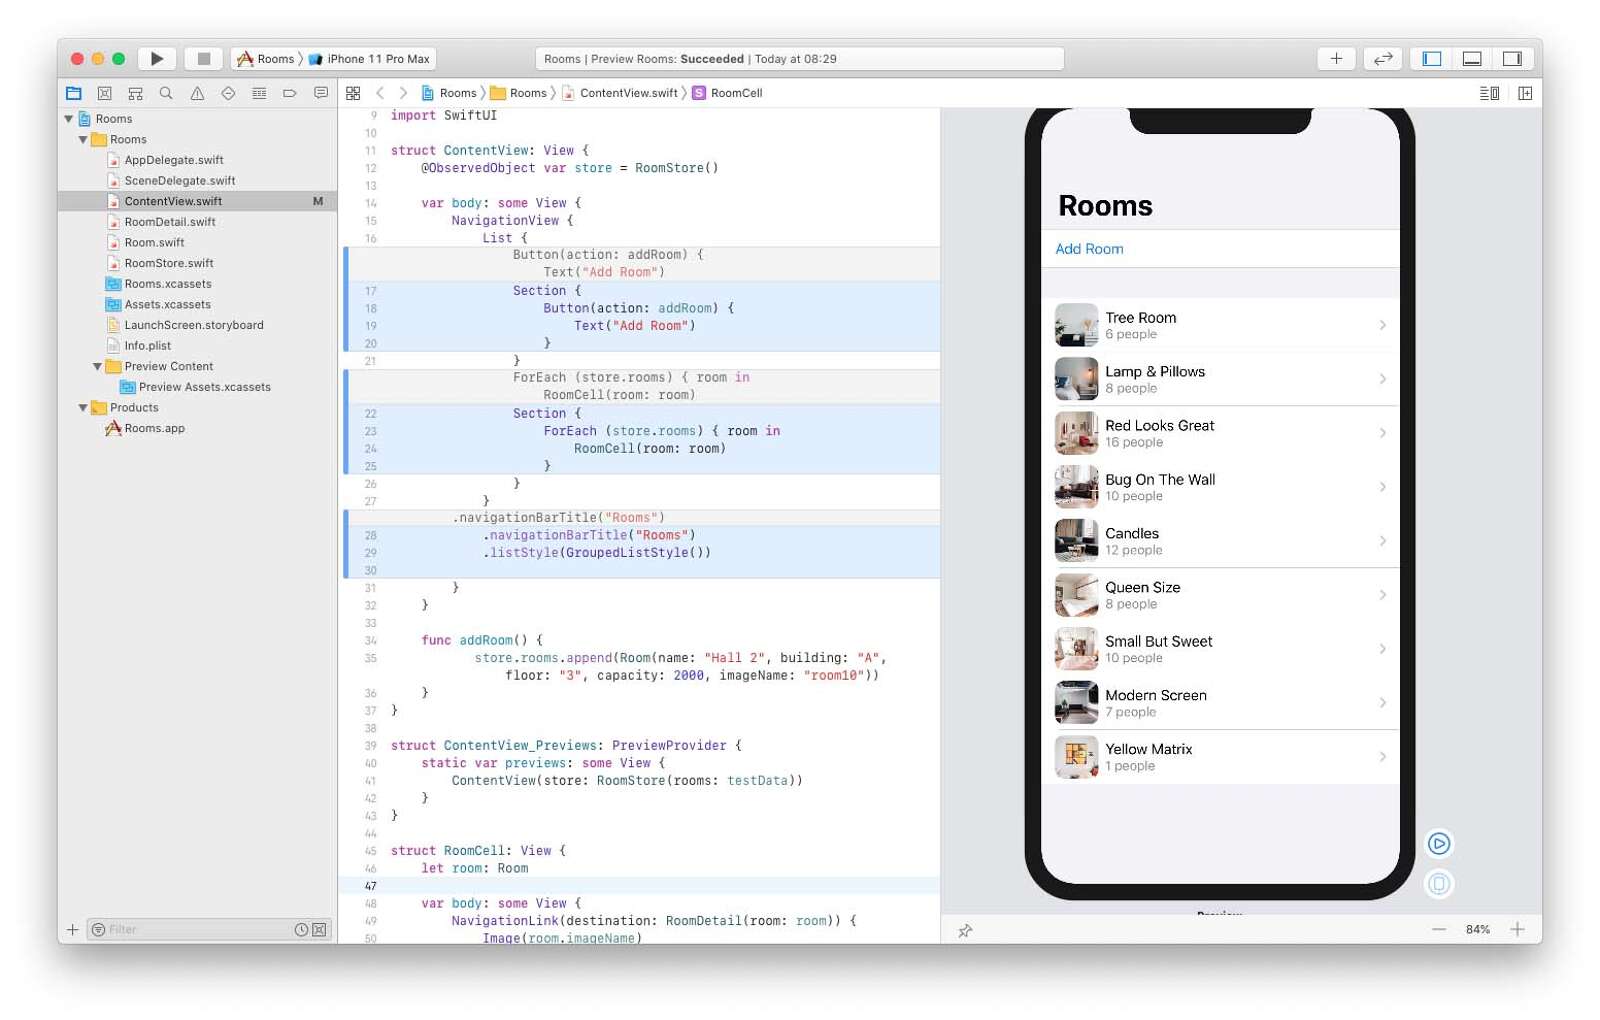 https://res.cloudinary.com/codewithjan/image/upload/v1578455408/swiftui-by-examples/swiftui-by-examples-55.jpg